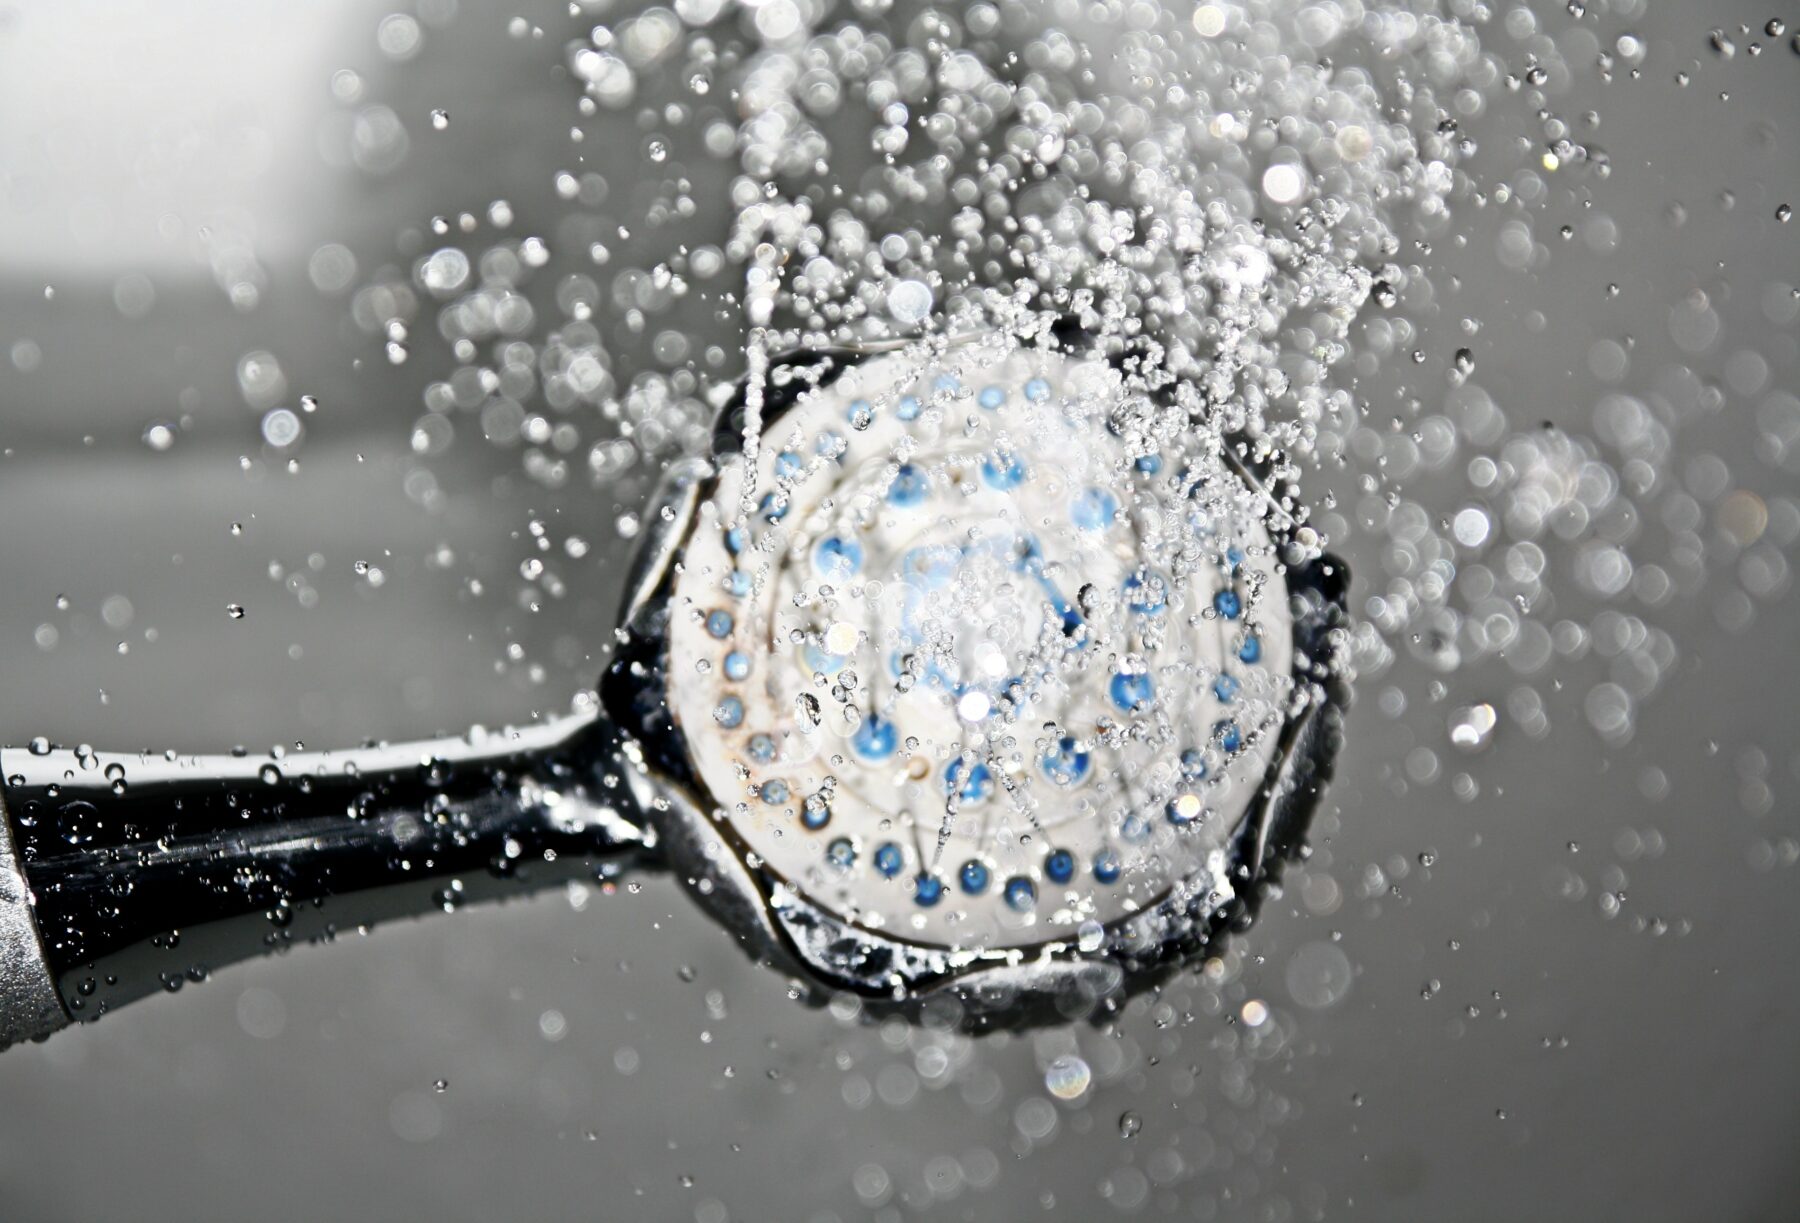 Showerhead with water.